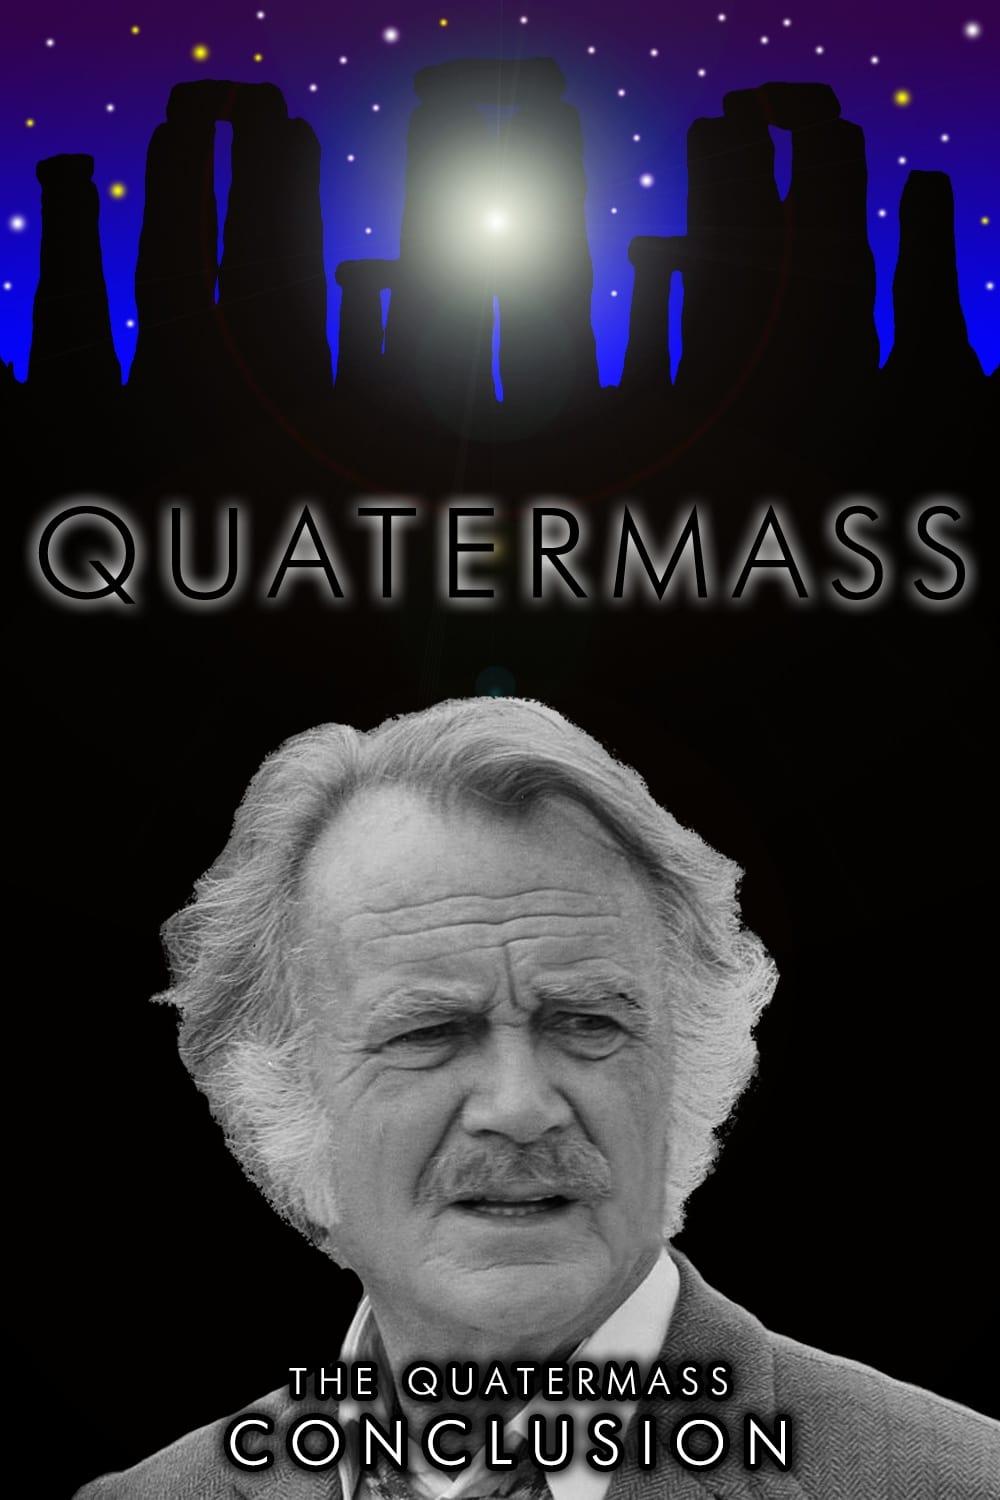 The Quatermass Conclusion poster